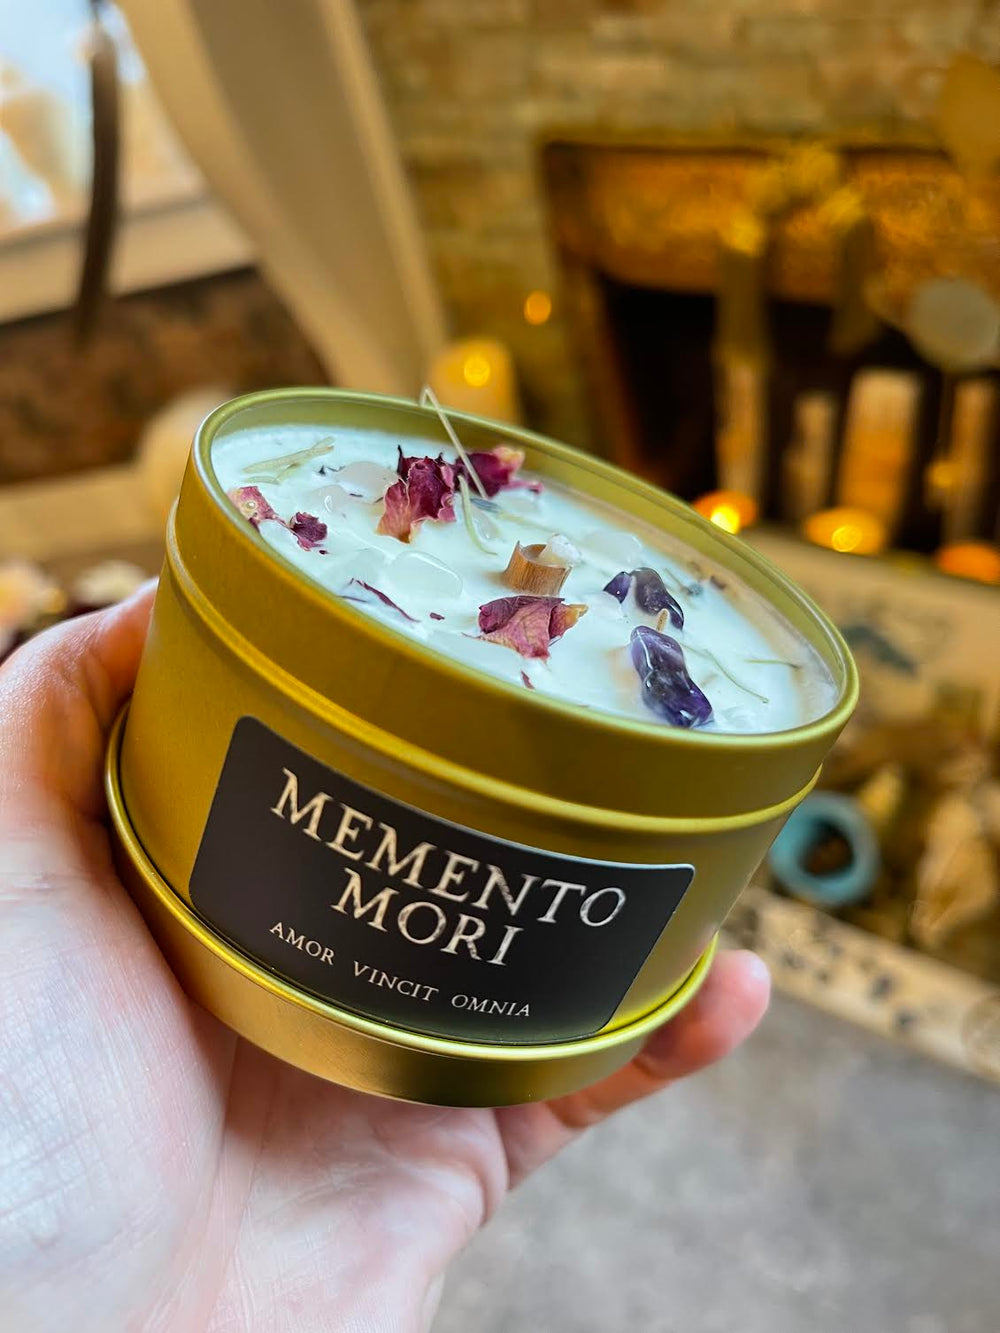 This is the front of the Memento Mori candle